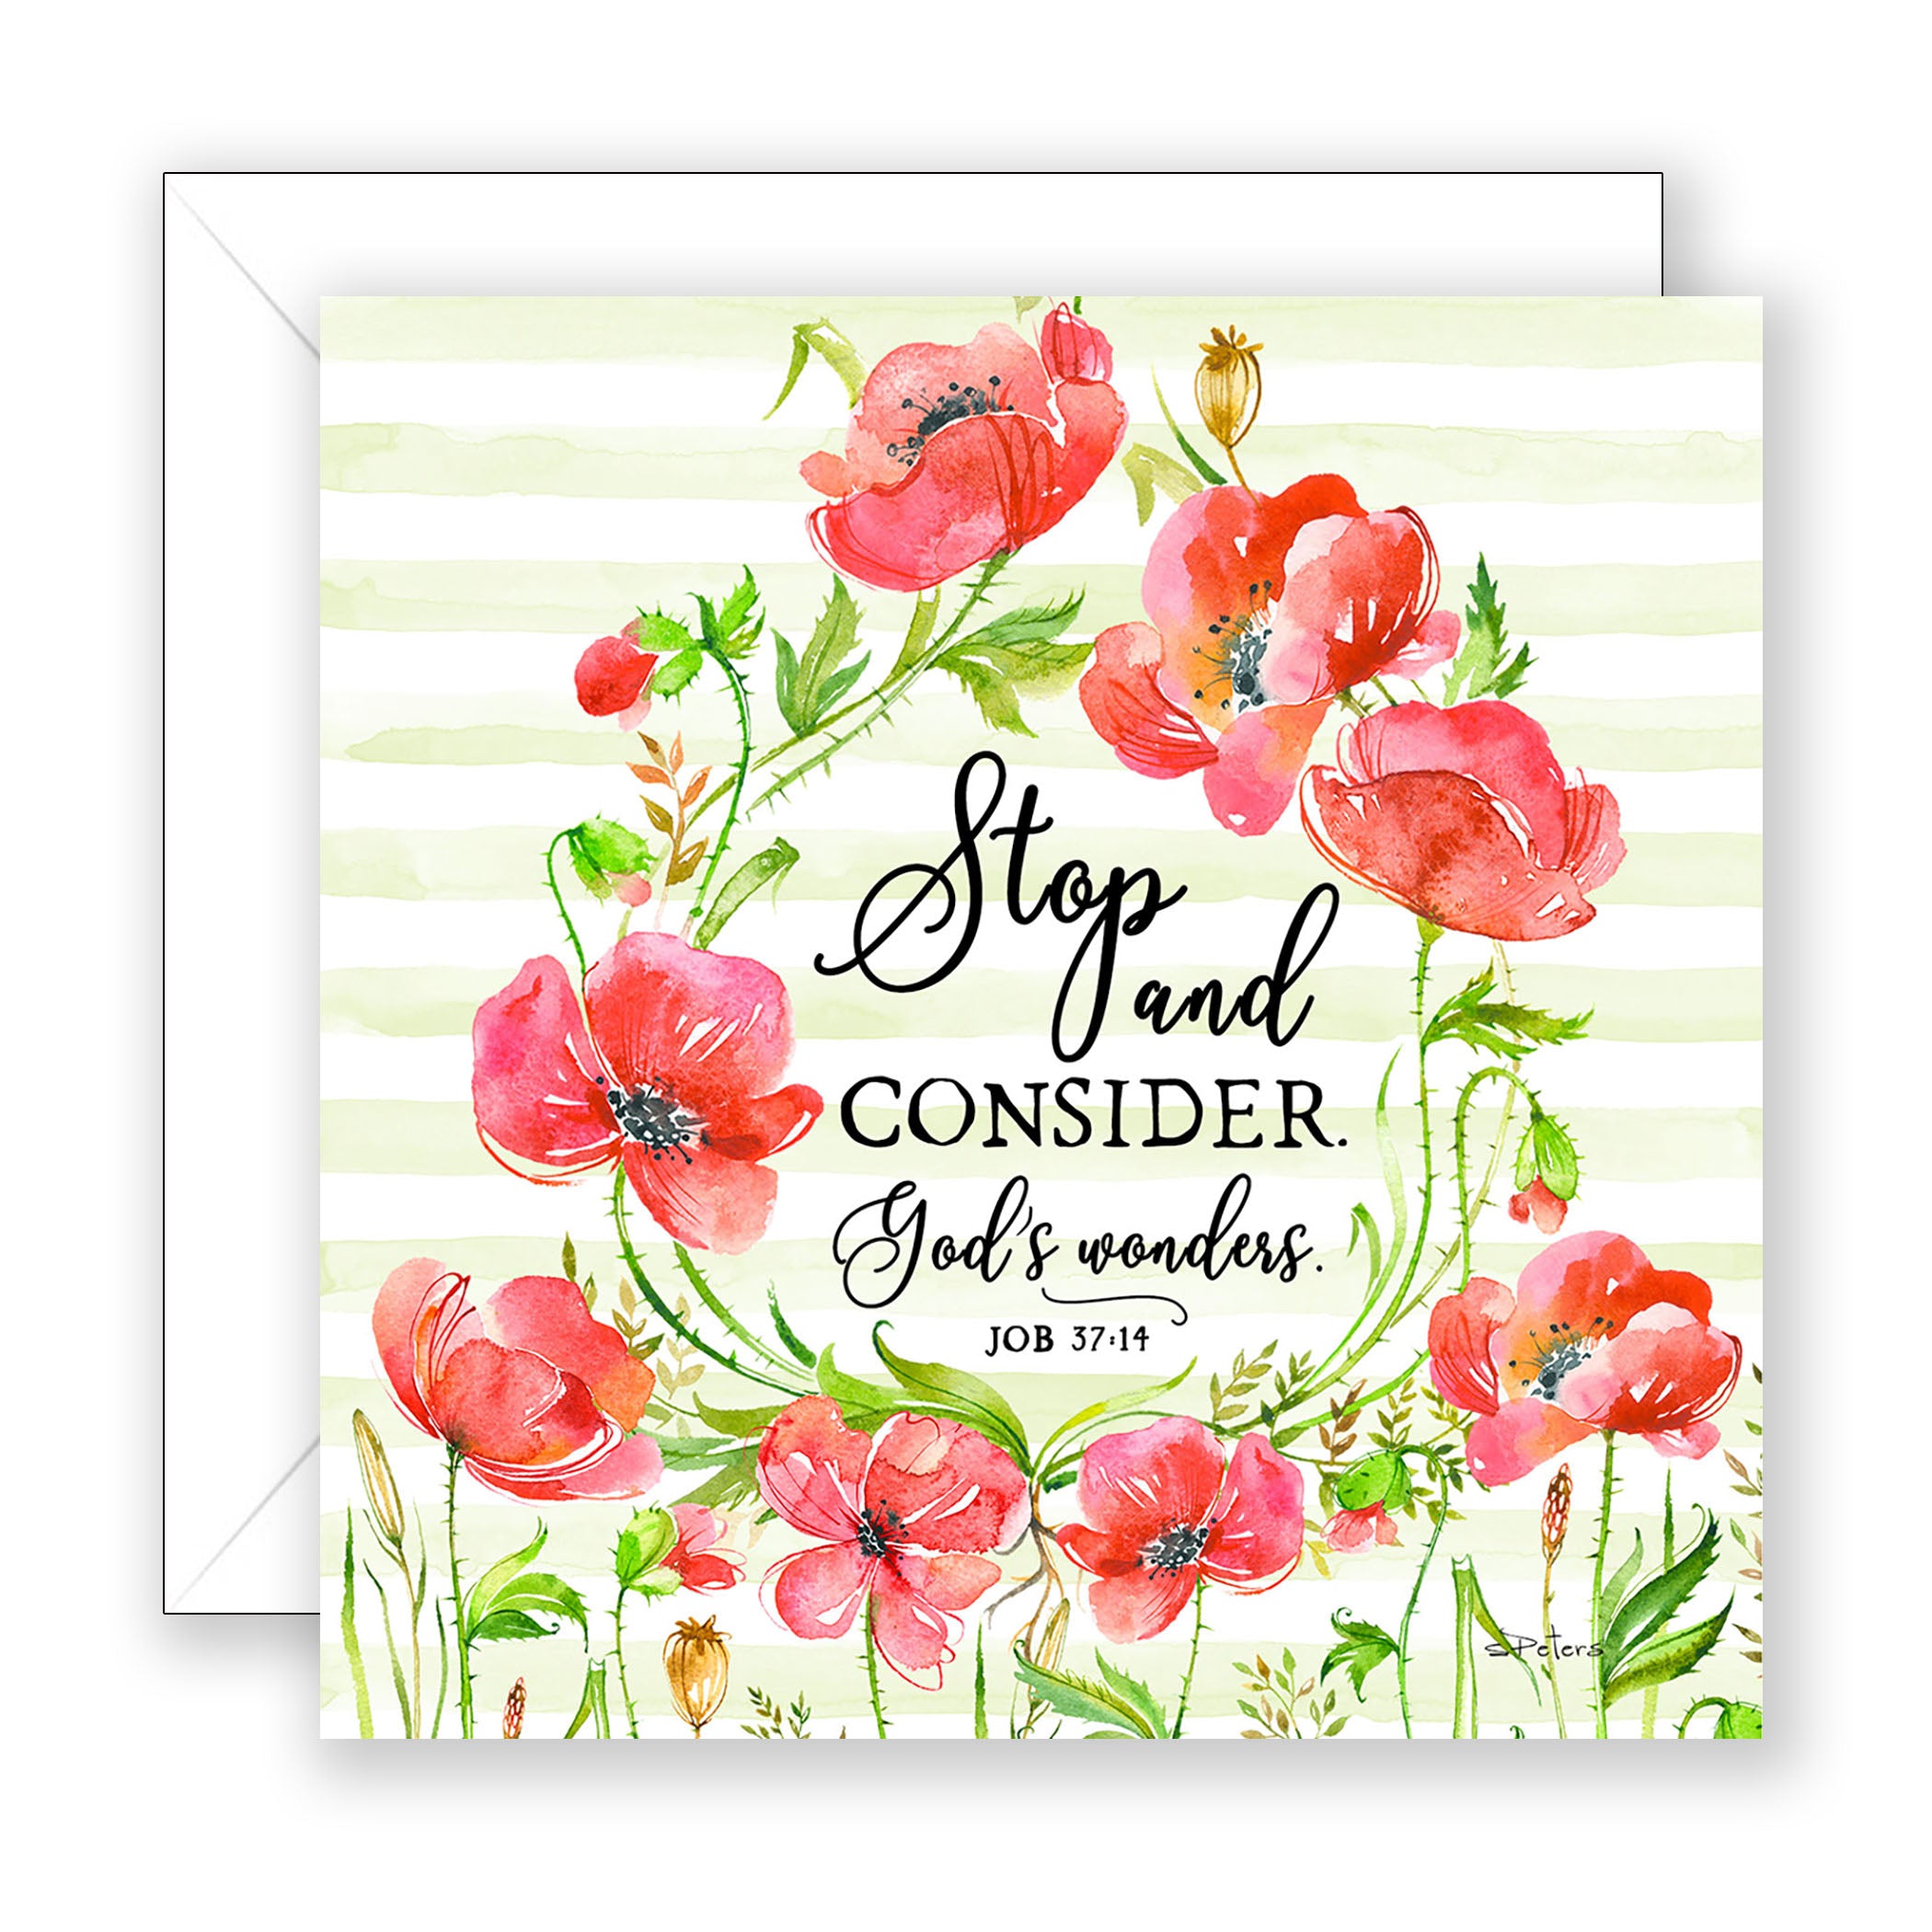 Stop and Consider ( Job 37:14) - Encouragement Card